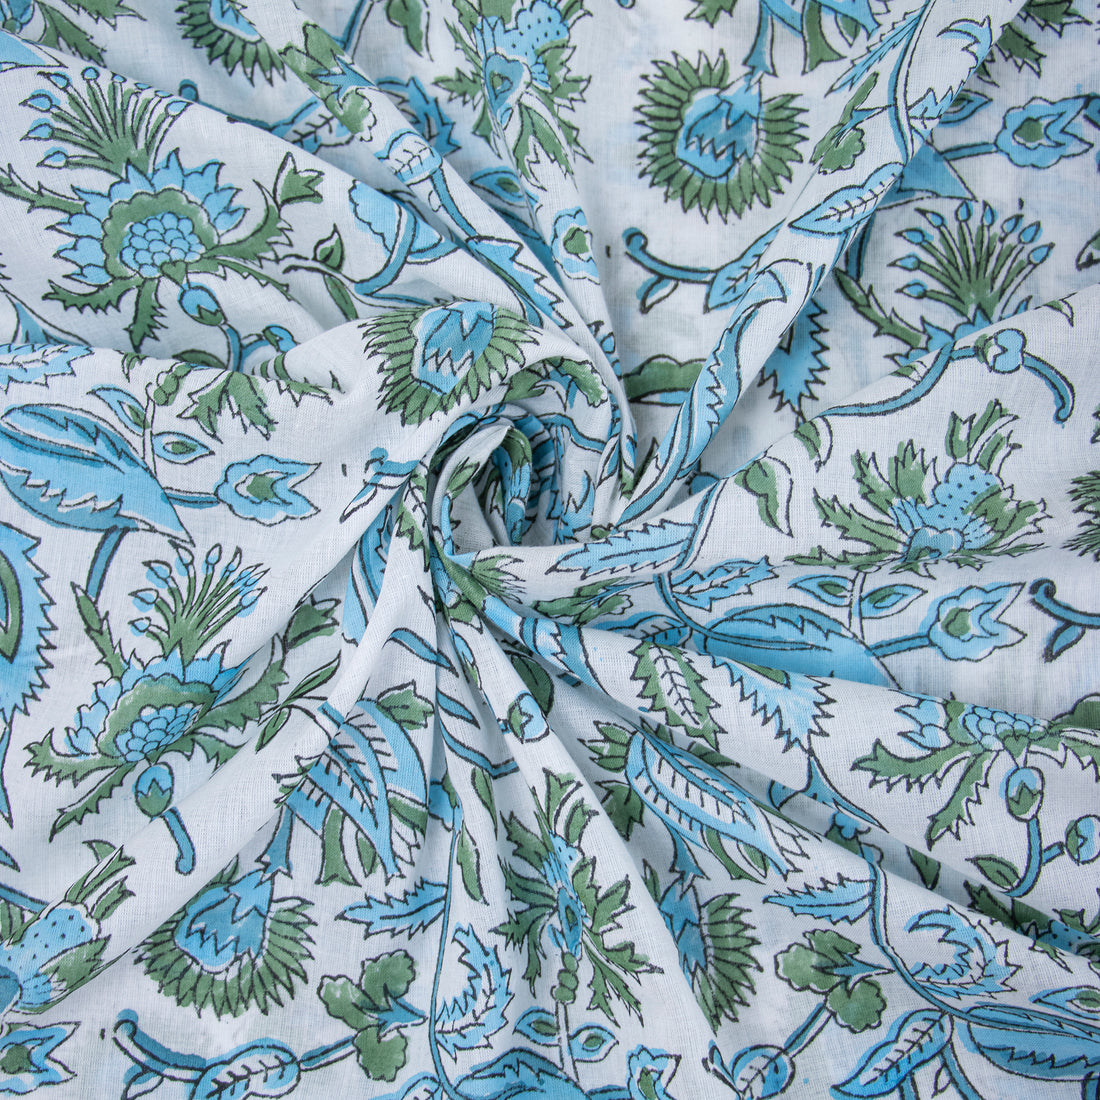 Floral Block Printed Soft Mulmul Cotton Fabric Online